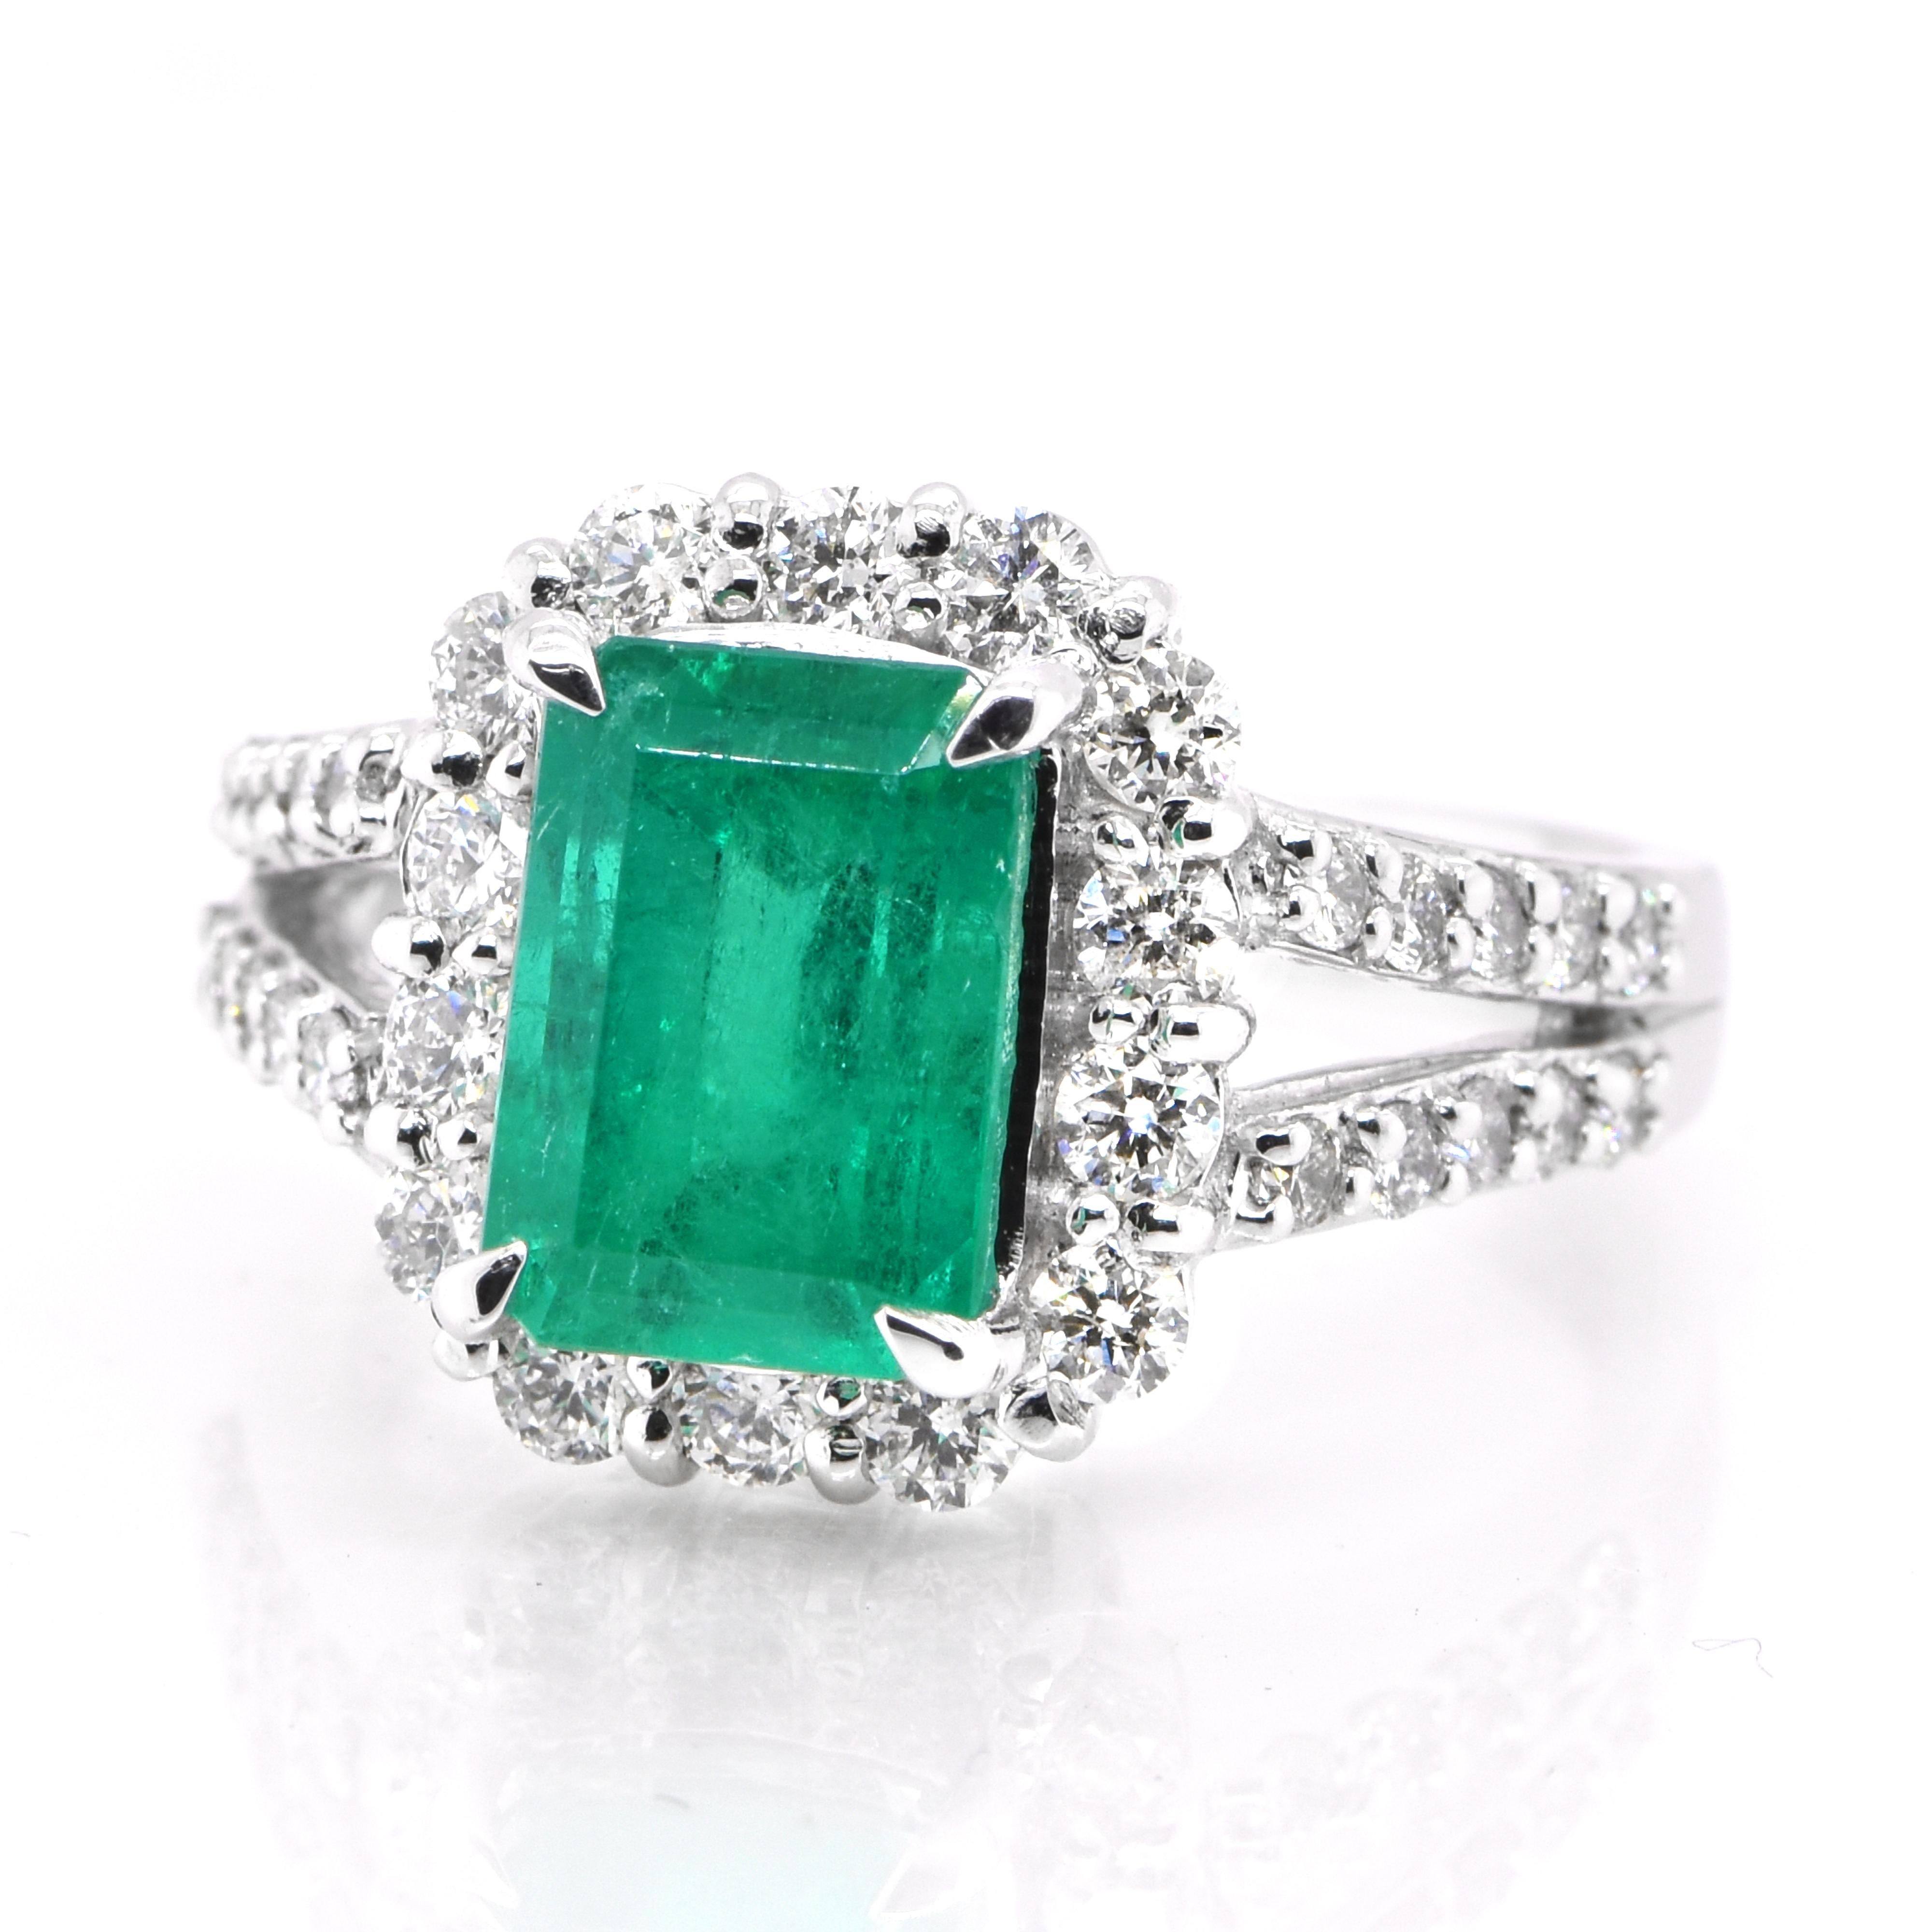 A stunning ring featuring a 2.49 Carat Natural Colombian Emerald and 0.85 Carats of Diamond Accents set in Platinum. People have admired emerald’s green for thousands of years. Emeralds have always been associated with the lushest landscapes and the